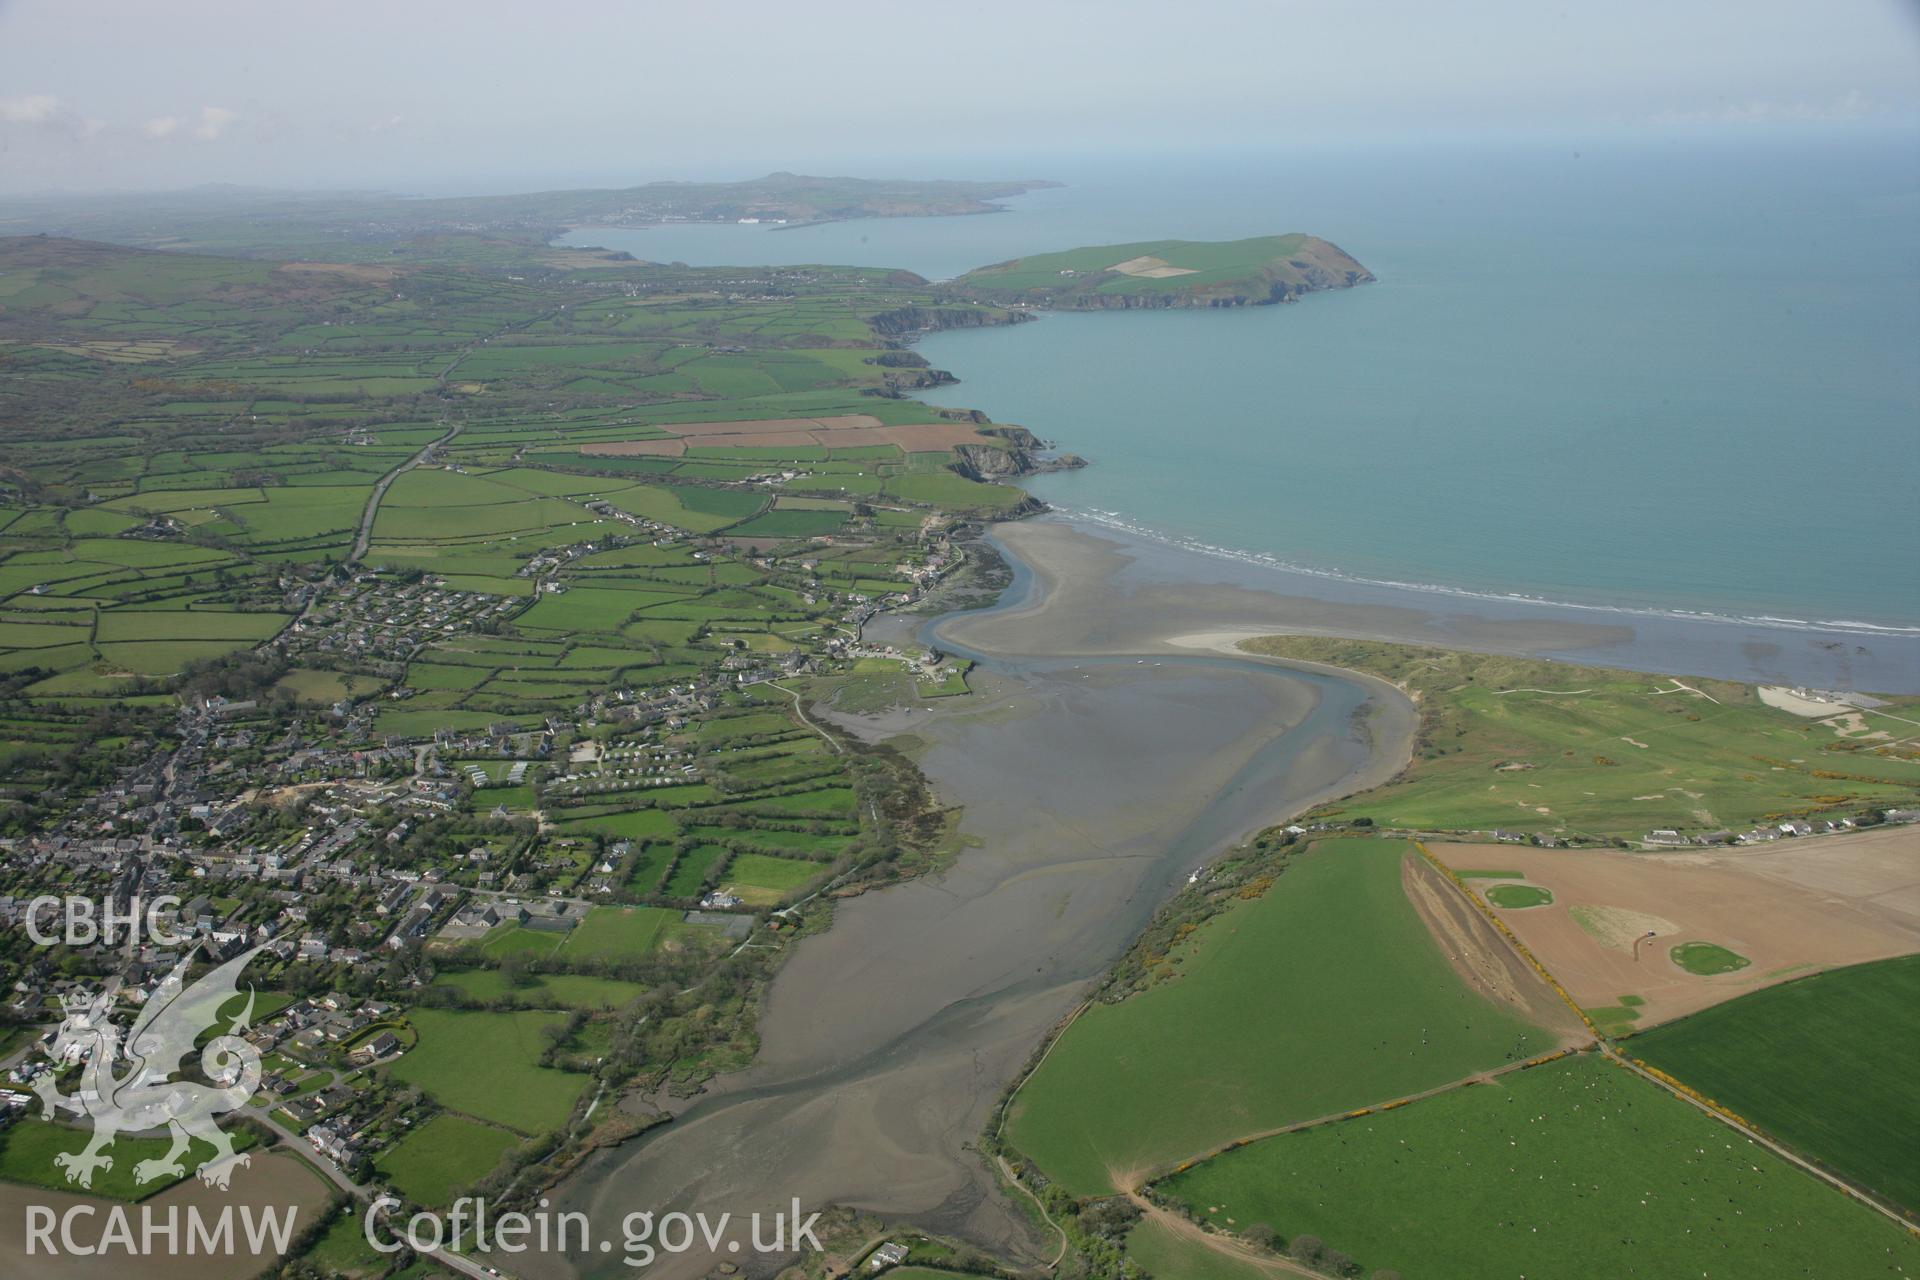 RCAHMW colour oblique aerial photograph of Newport town, Pembrokeshire, in landscape view. Taken on 17 April 2007 by Toby Driver